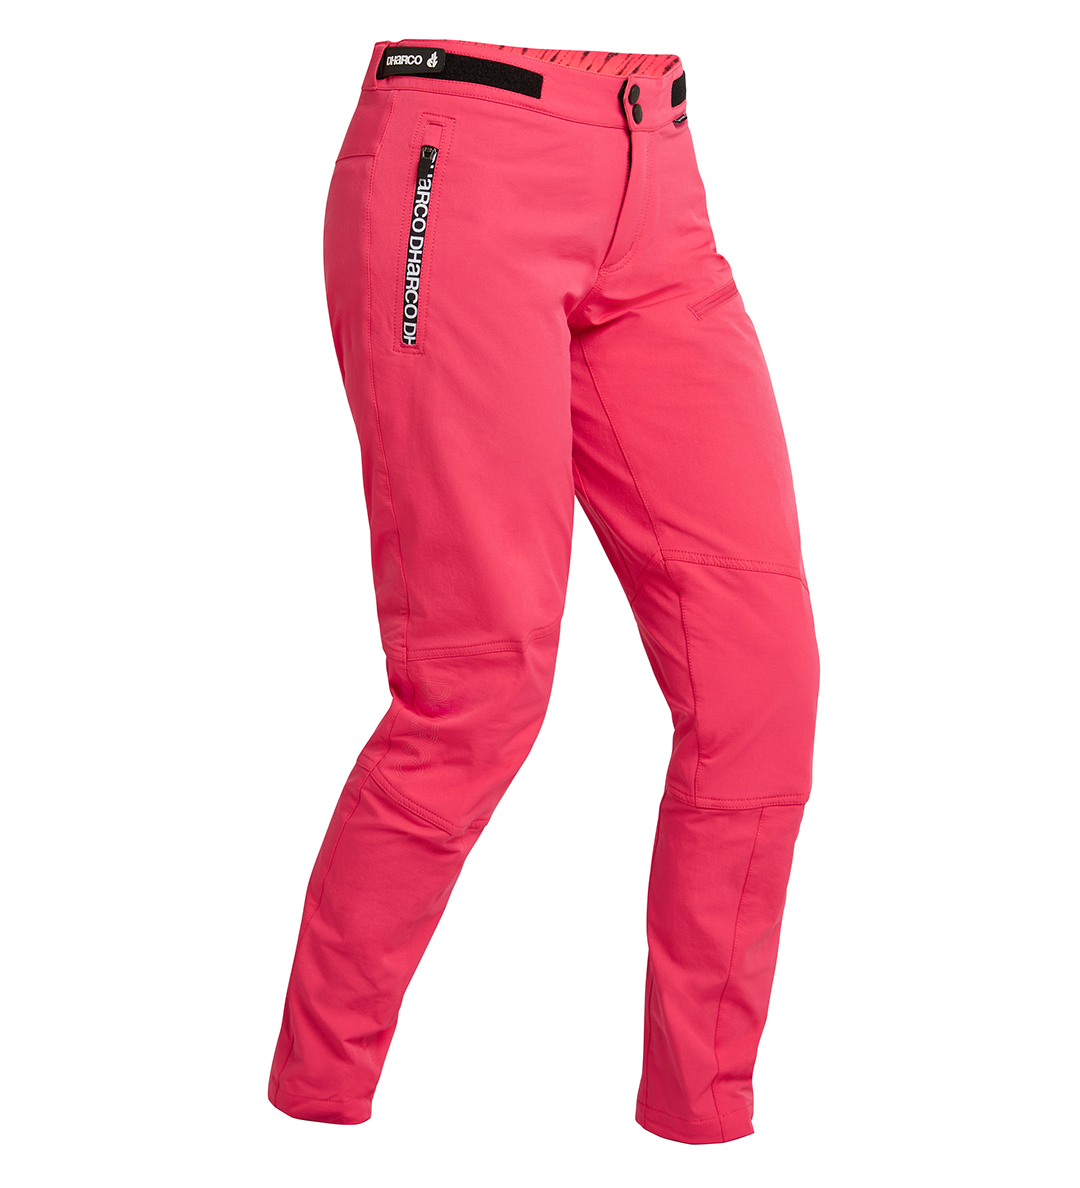 DHARCO GRAVITY PANTS WOMENS - VAL DI SOLE